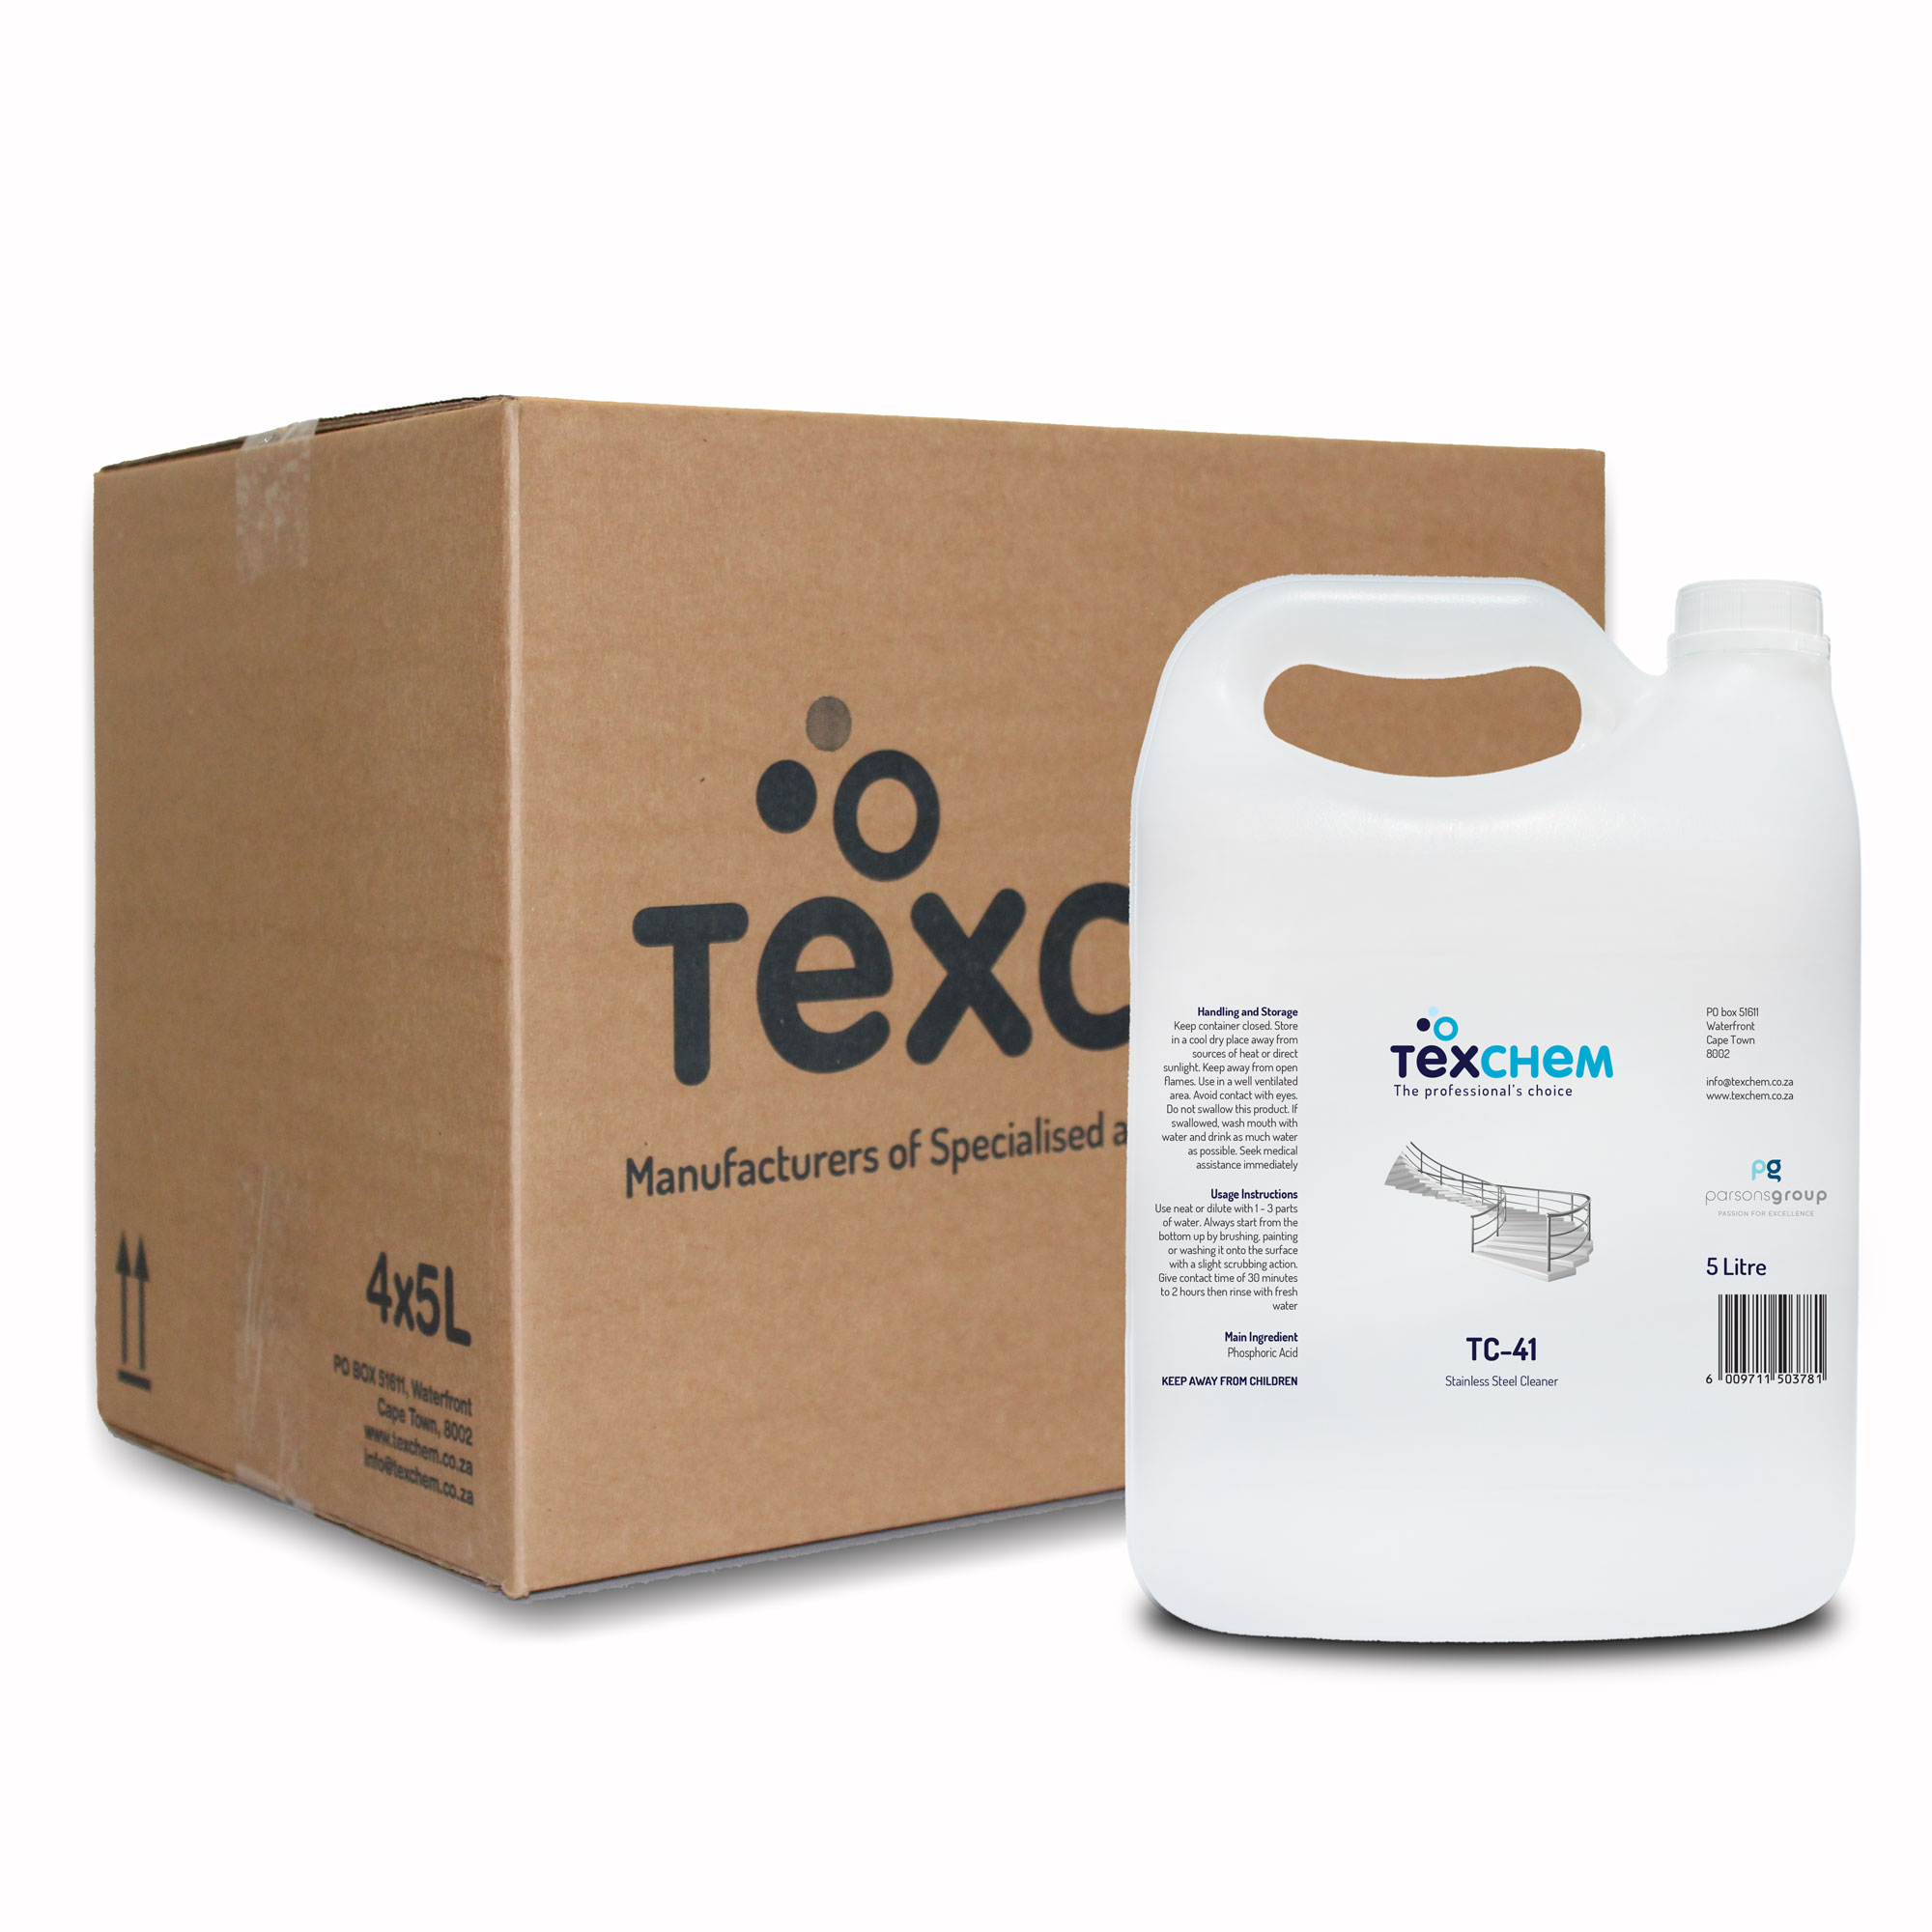 Texchem - Ind - Stainless Steel Cleaner - Liquid - Box (4x5ltr)